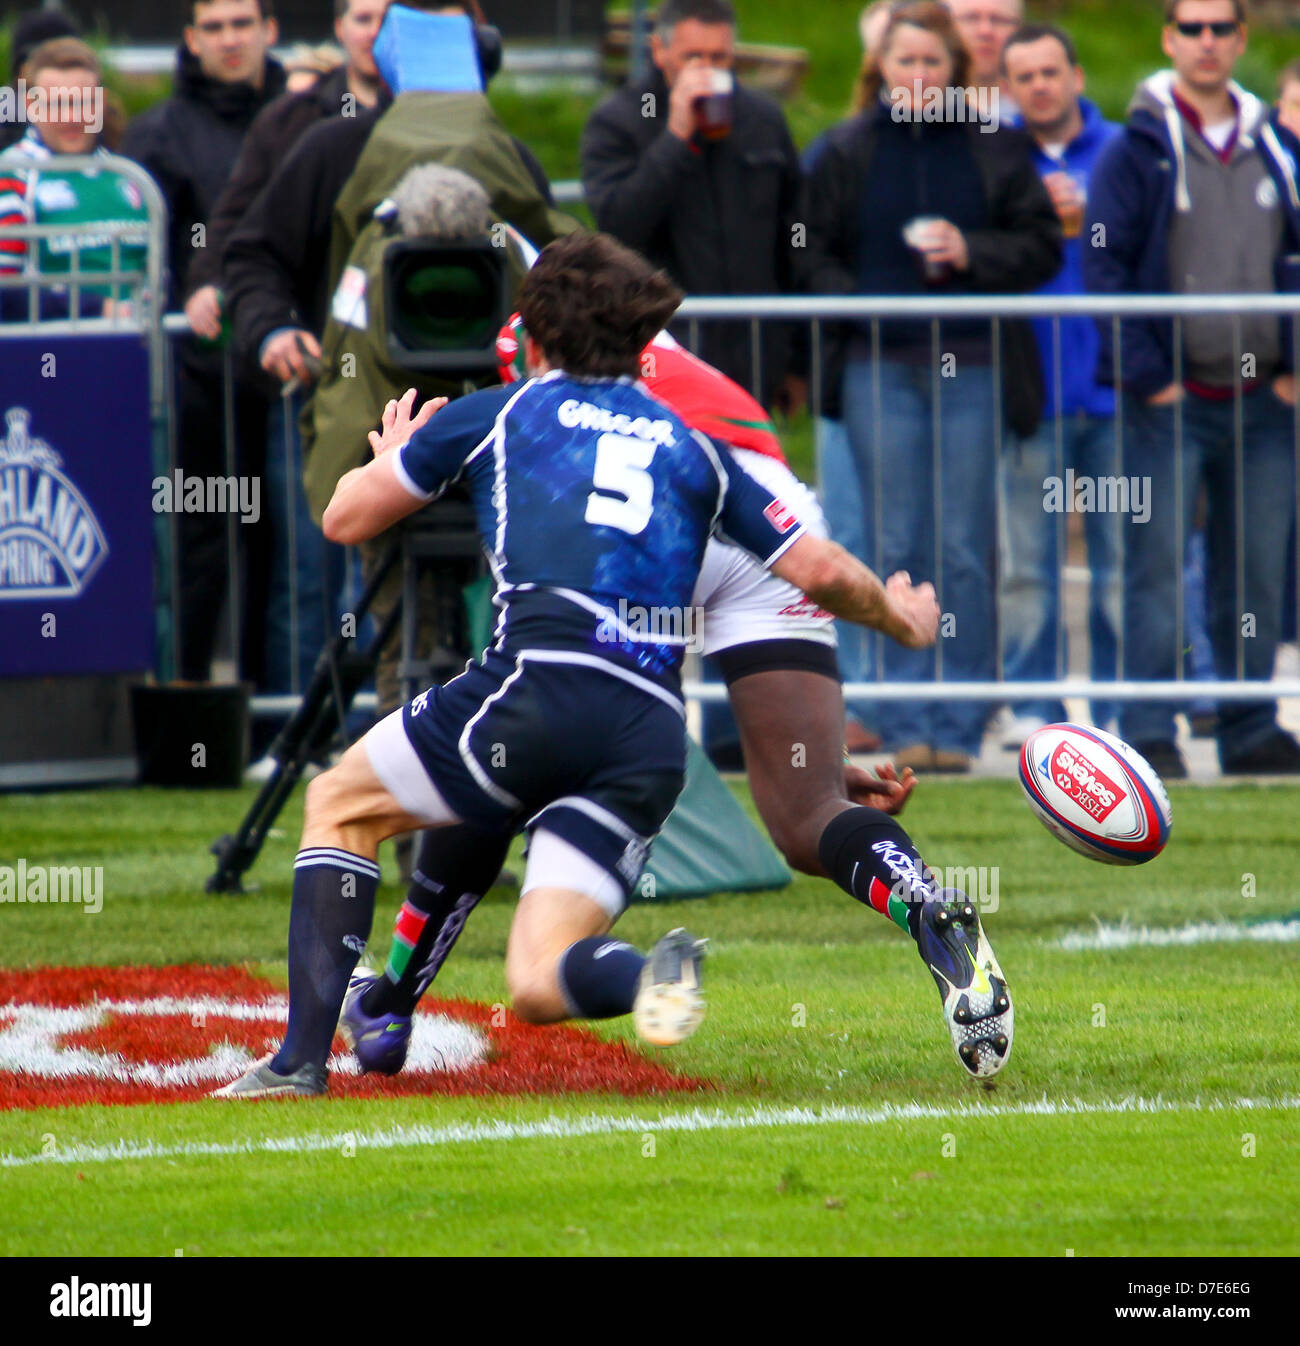 Glasgow, Scotland, UK. 5th May 2013. during the Glasgow Emirates Airline Glasgow 7s from Scotstoun. Kenya 24 v Scotland 19.  Willy Ambaka scores Kenya's 4th try pursued by Scotland's Colin Gregor. Credit:  ALAN OLIVER / Alamy Live News Stock Photo